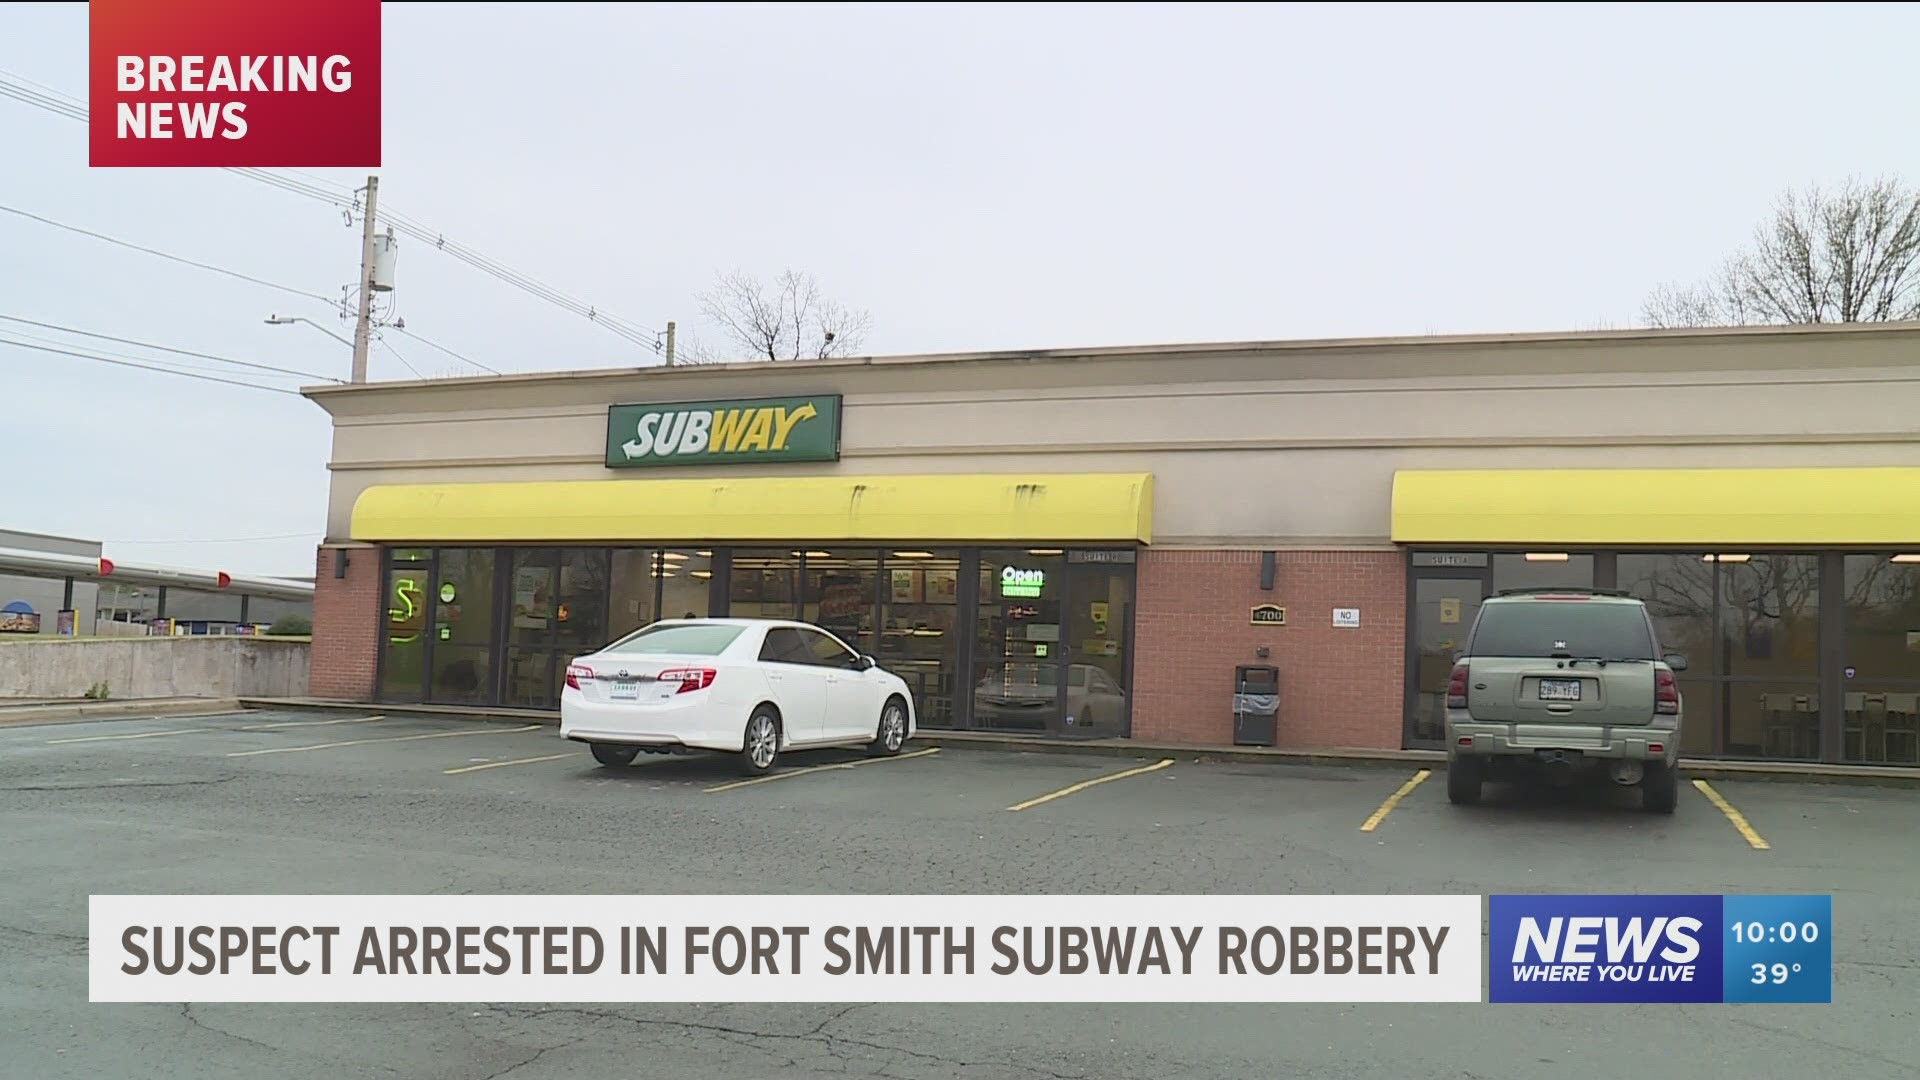 Suspect arrested in Fort Smith Subway robbery